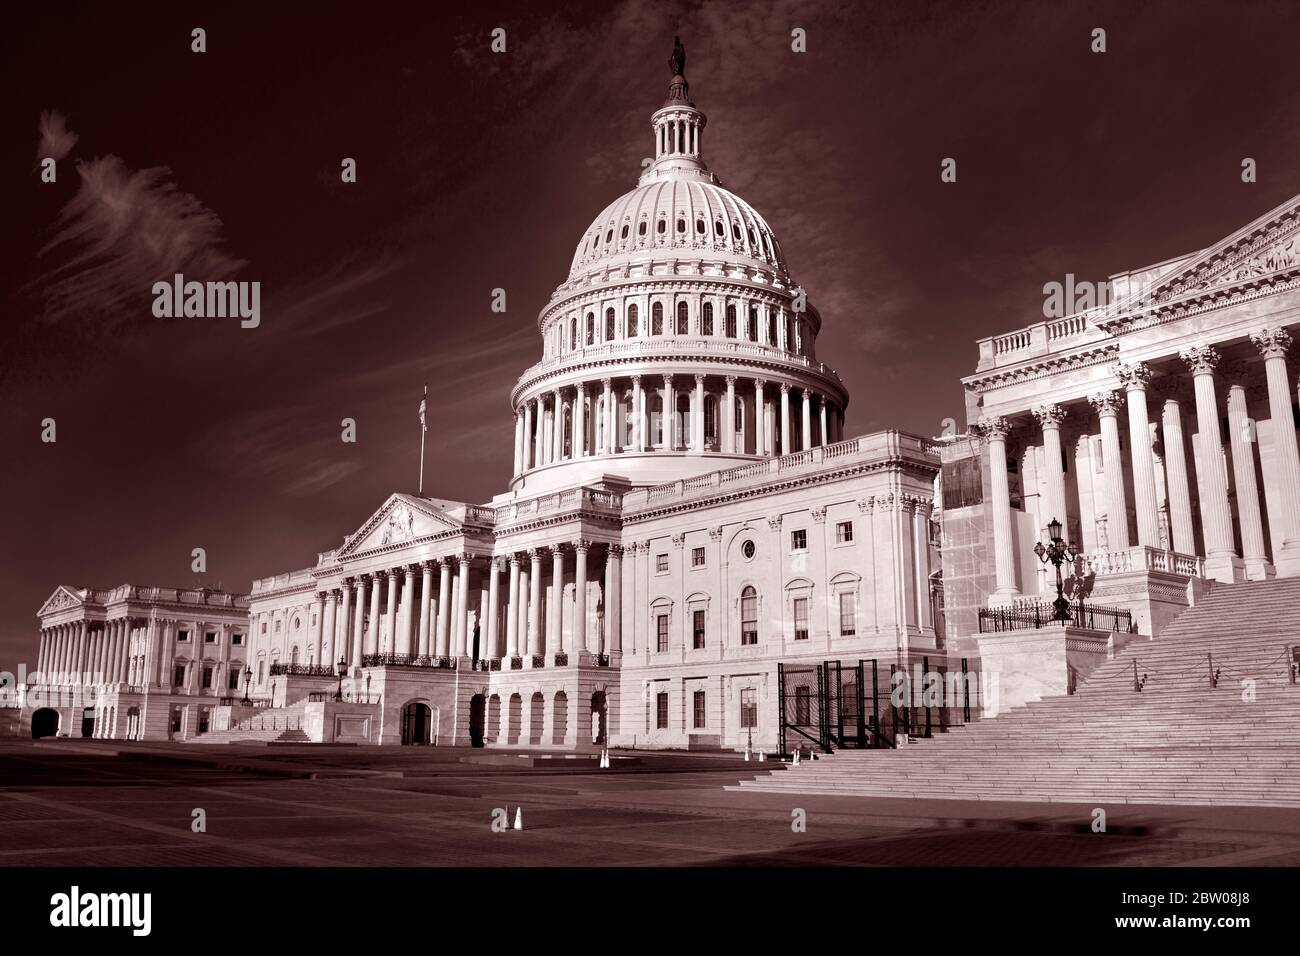 The United States Capitol, First St SE, Washington, DC 20004, USA.  Photographed in the daytime. American tourist destination.  United States Congress Stock Photo